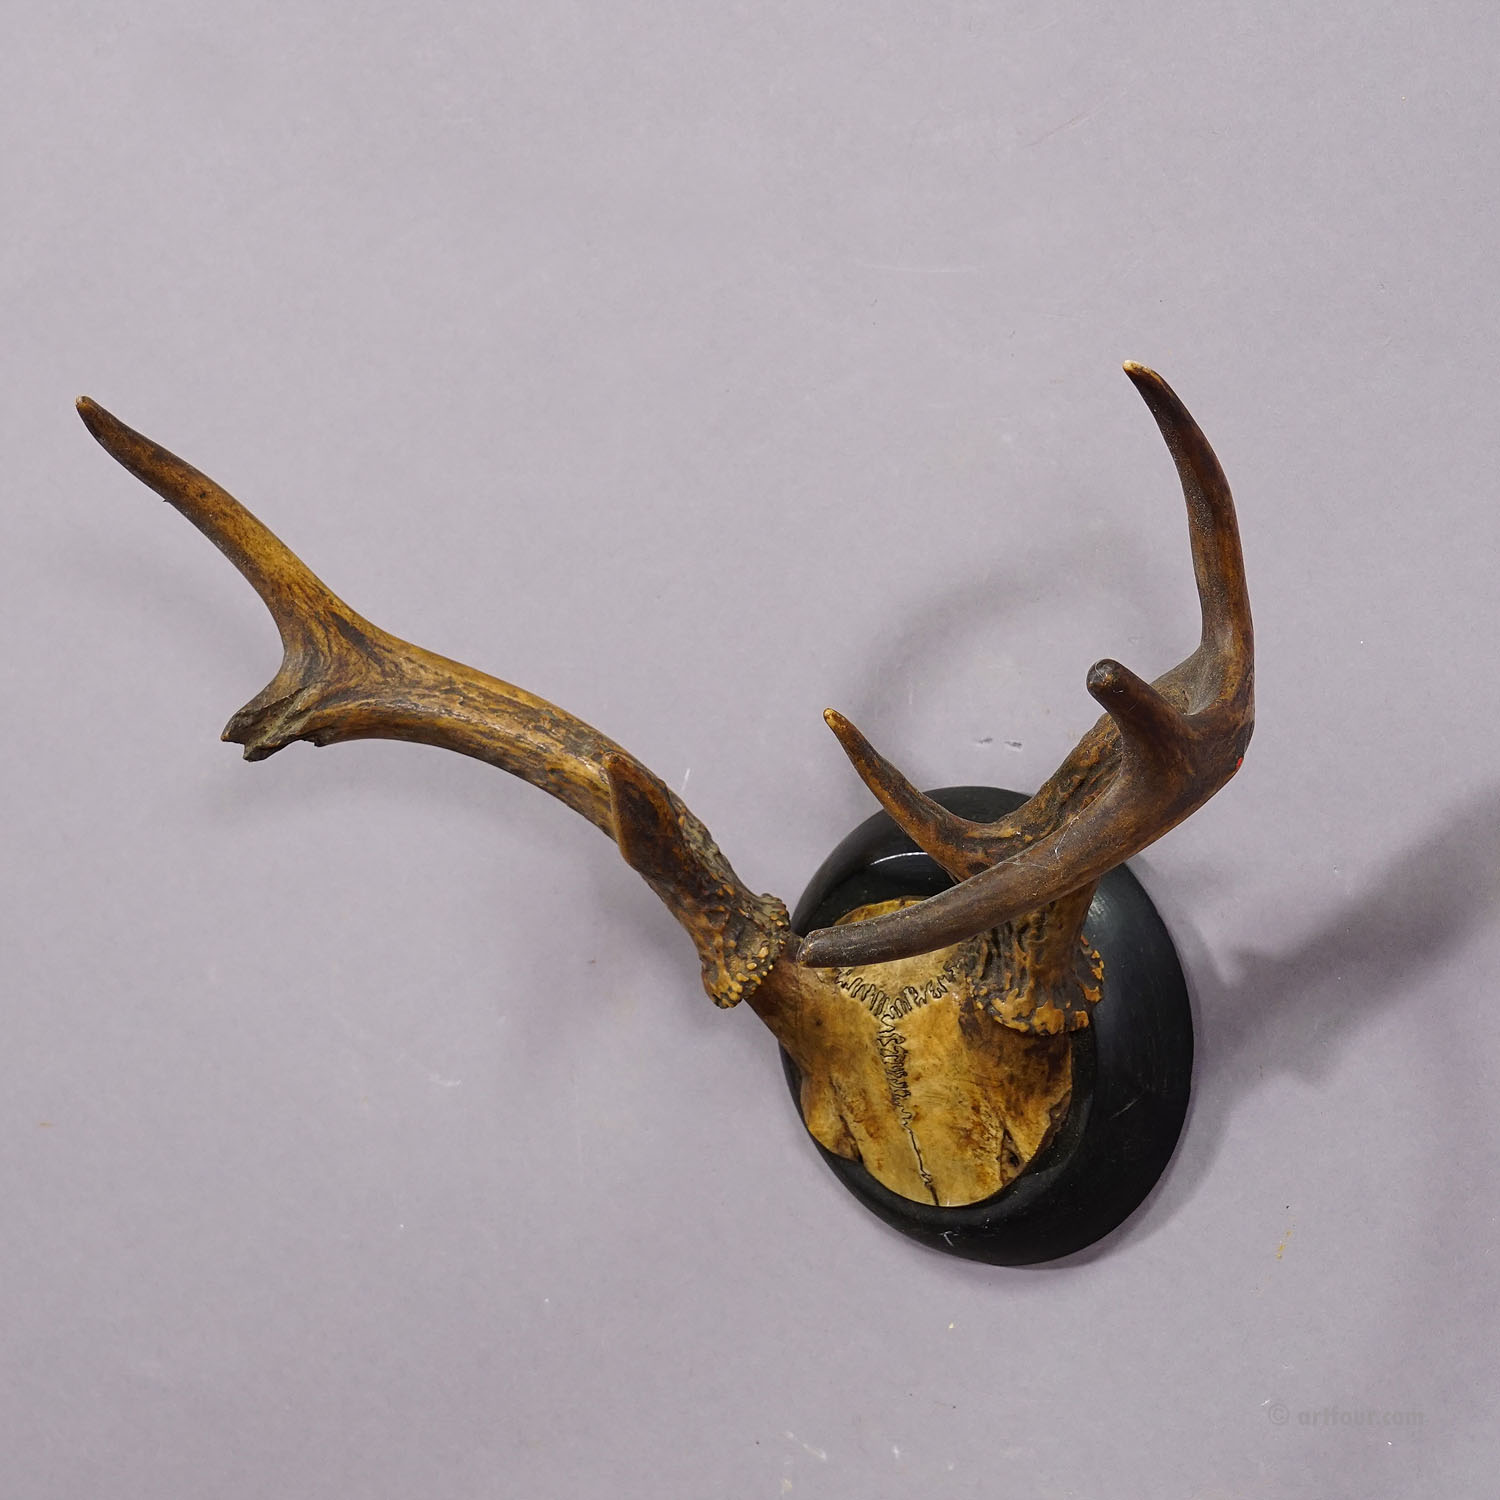 Abnorm White Tailed Deer Trophy Mount on Wooden Plaque ca. 1900s